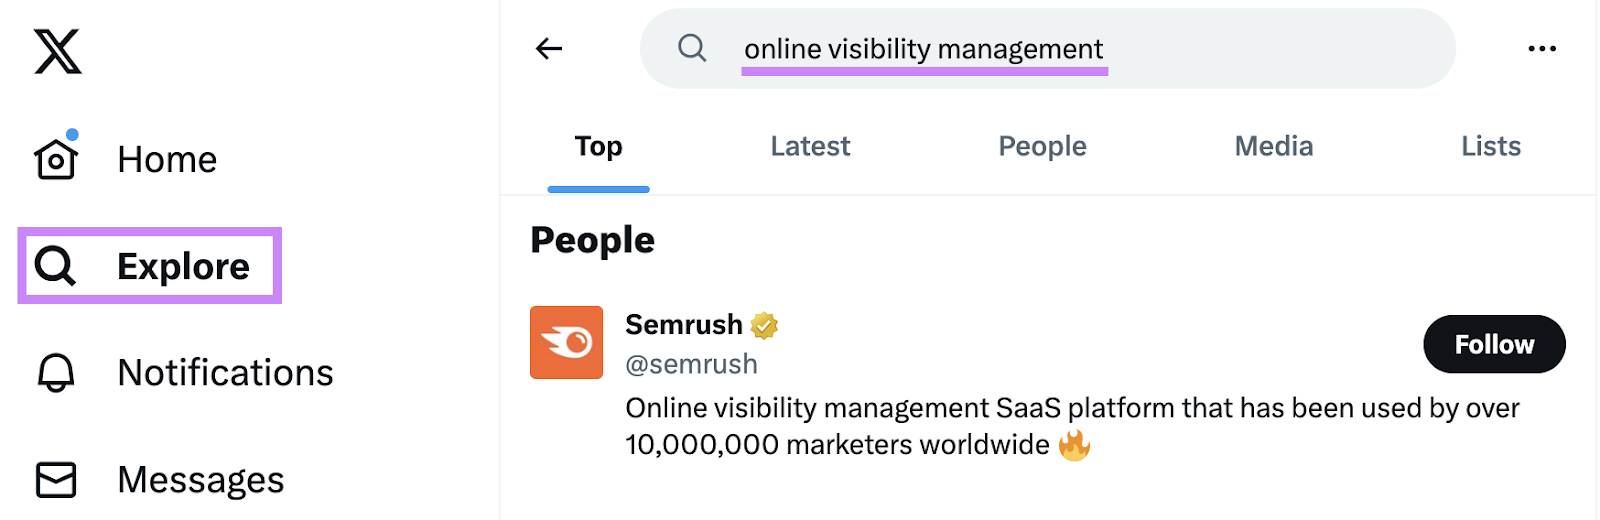 Twitter search result for online visibility management